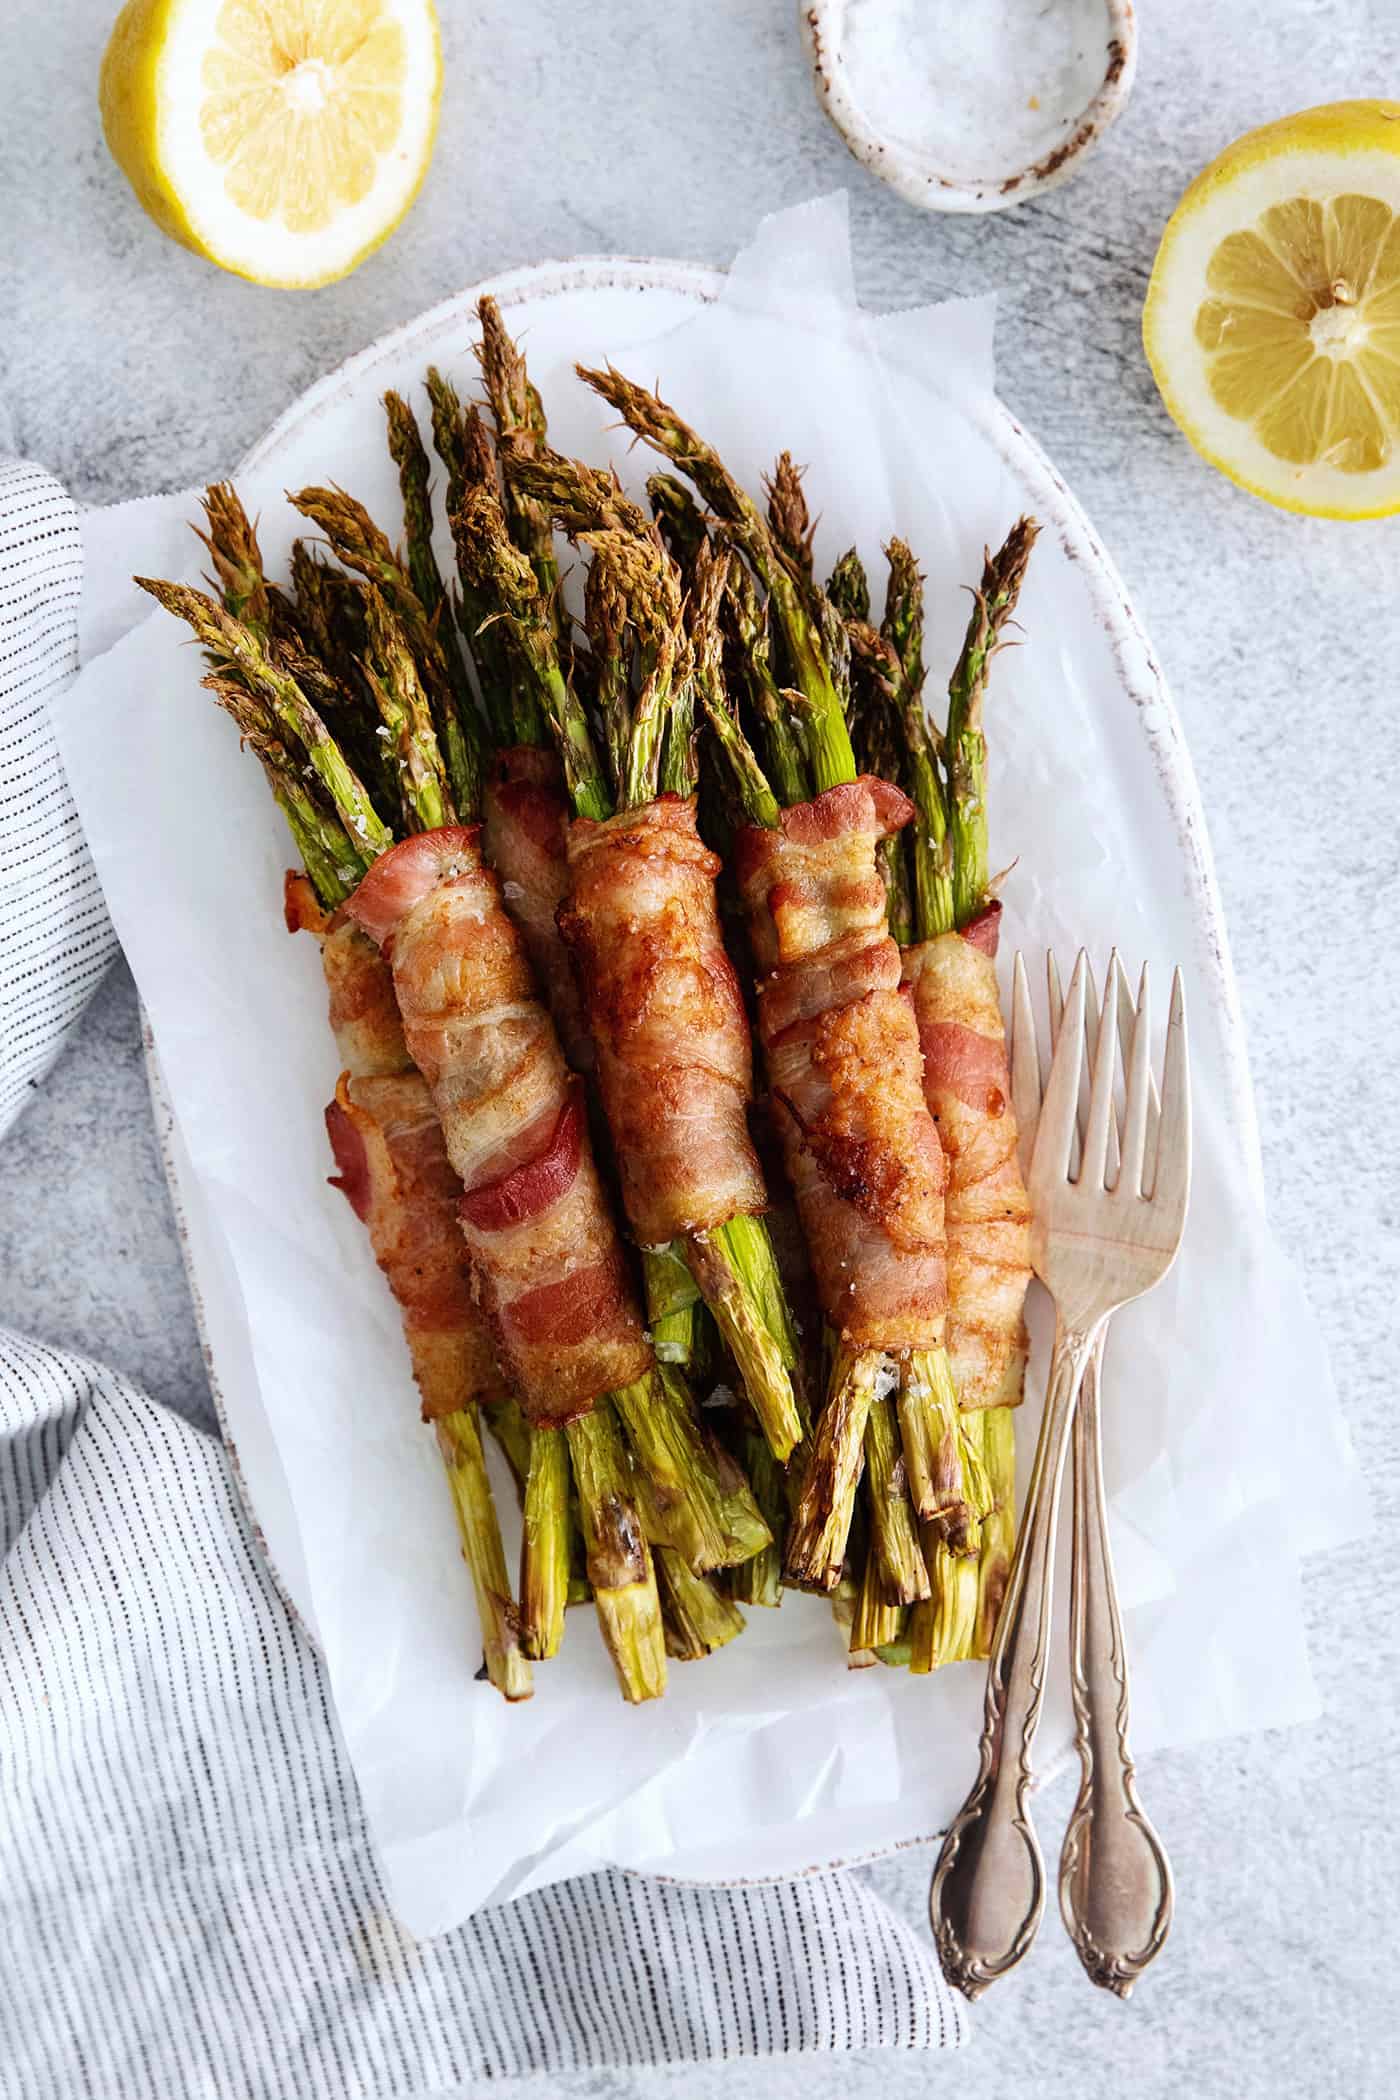 Overhead view of bacon wrapped asparagus on a plate